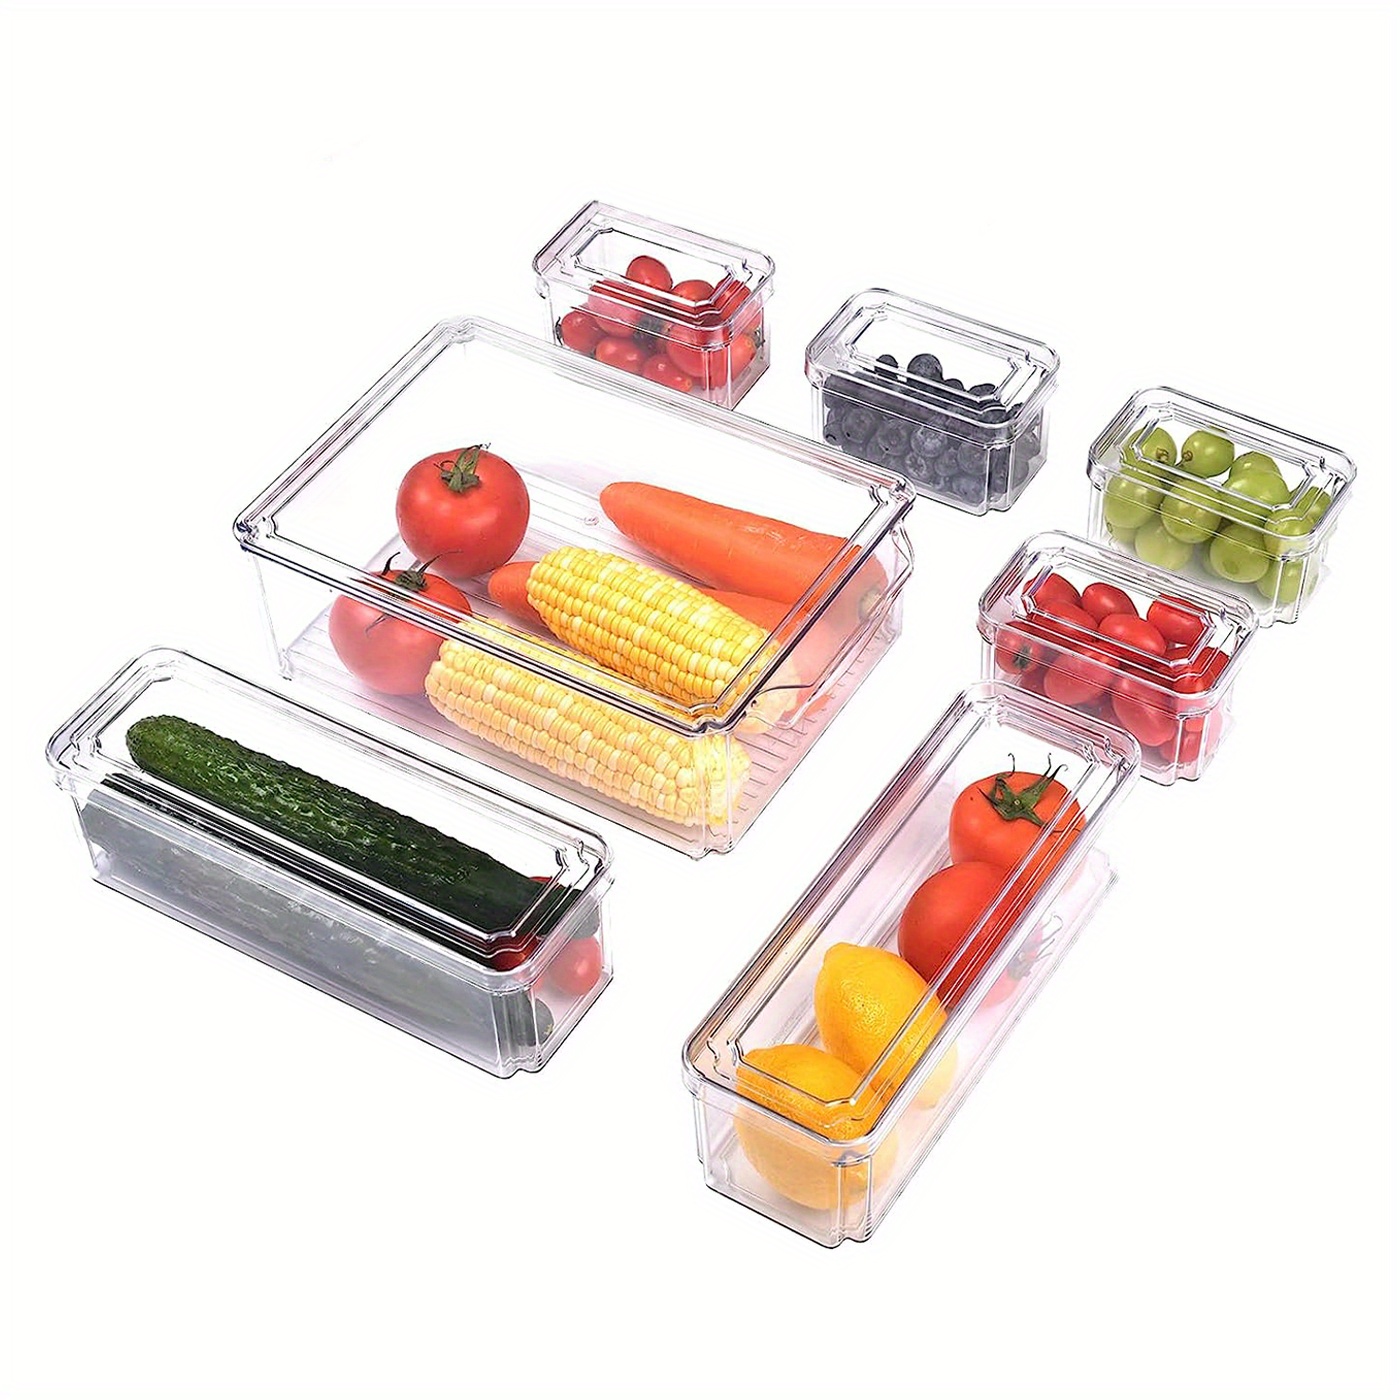  JETEHO 10 Pack Refrigerator Organizer Bins, Fridge Organizers  and Storage Clear, Stackable Fridge Organizer with Lid, BPA-Free Fruit  Storage Containers for Fridge, Kitchen, Food, Produce, Vegetable: Home &  Kitchen